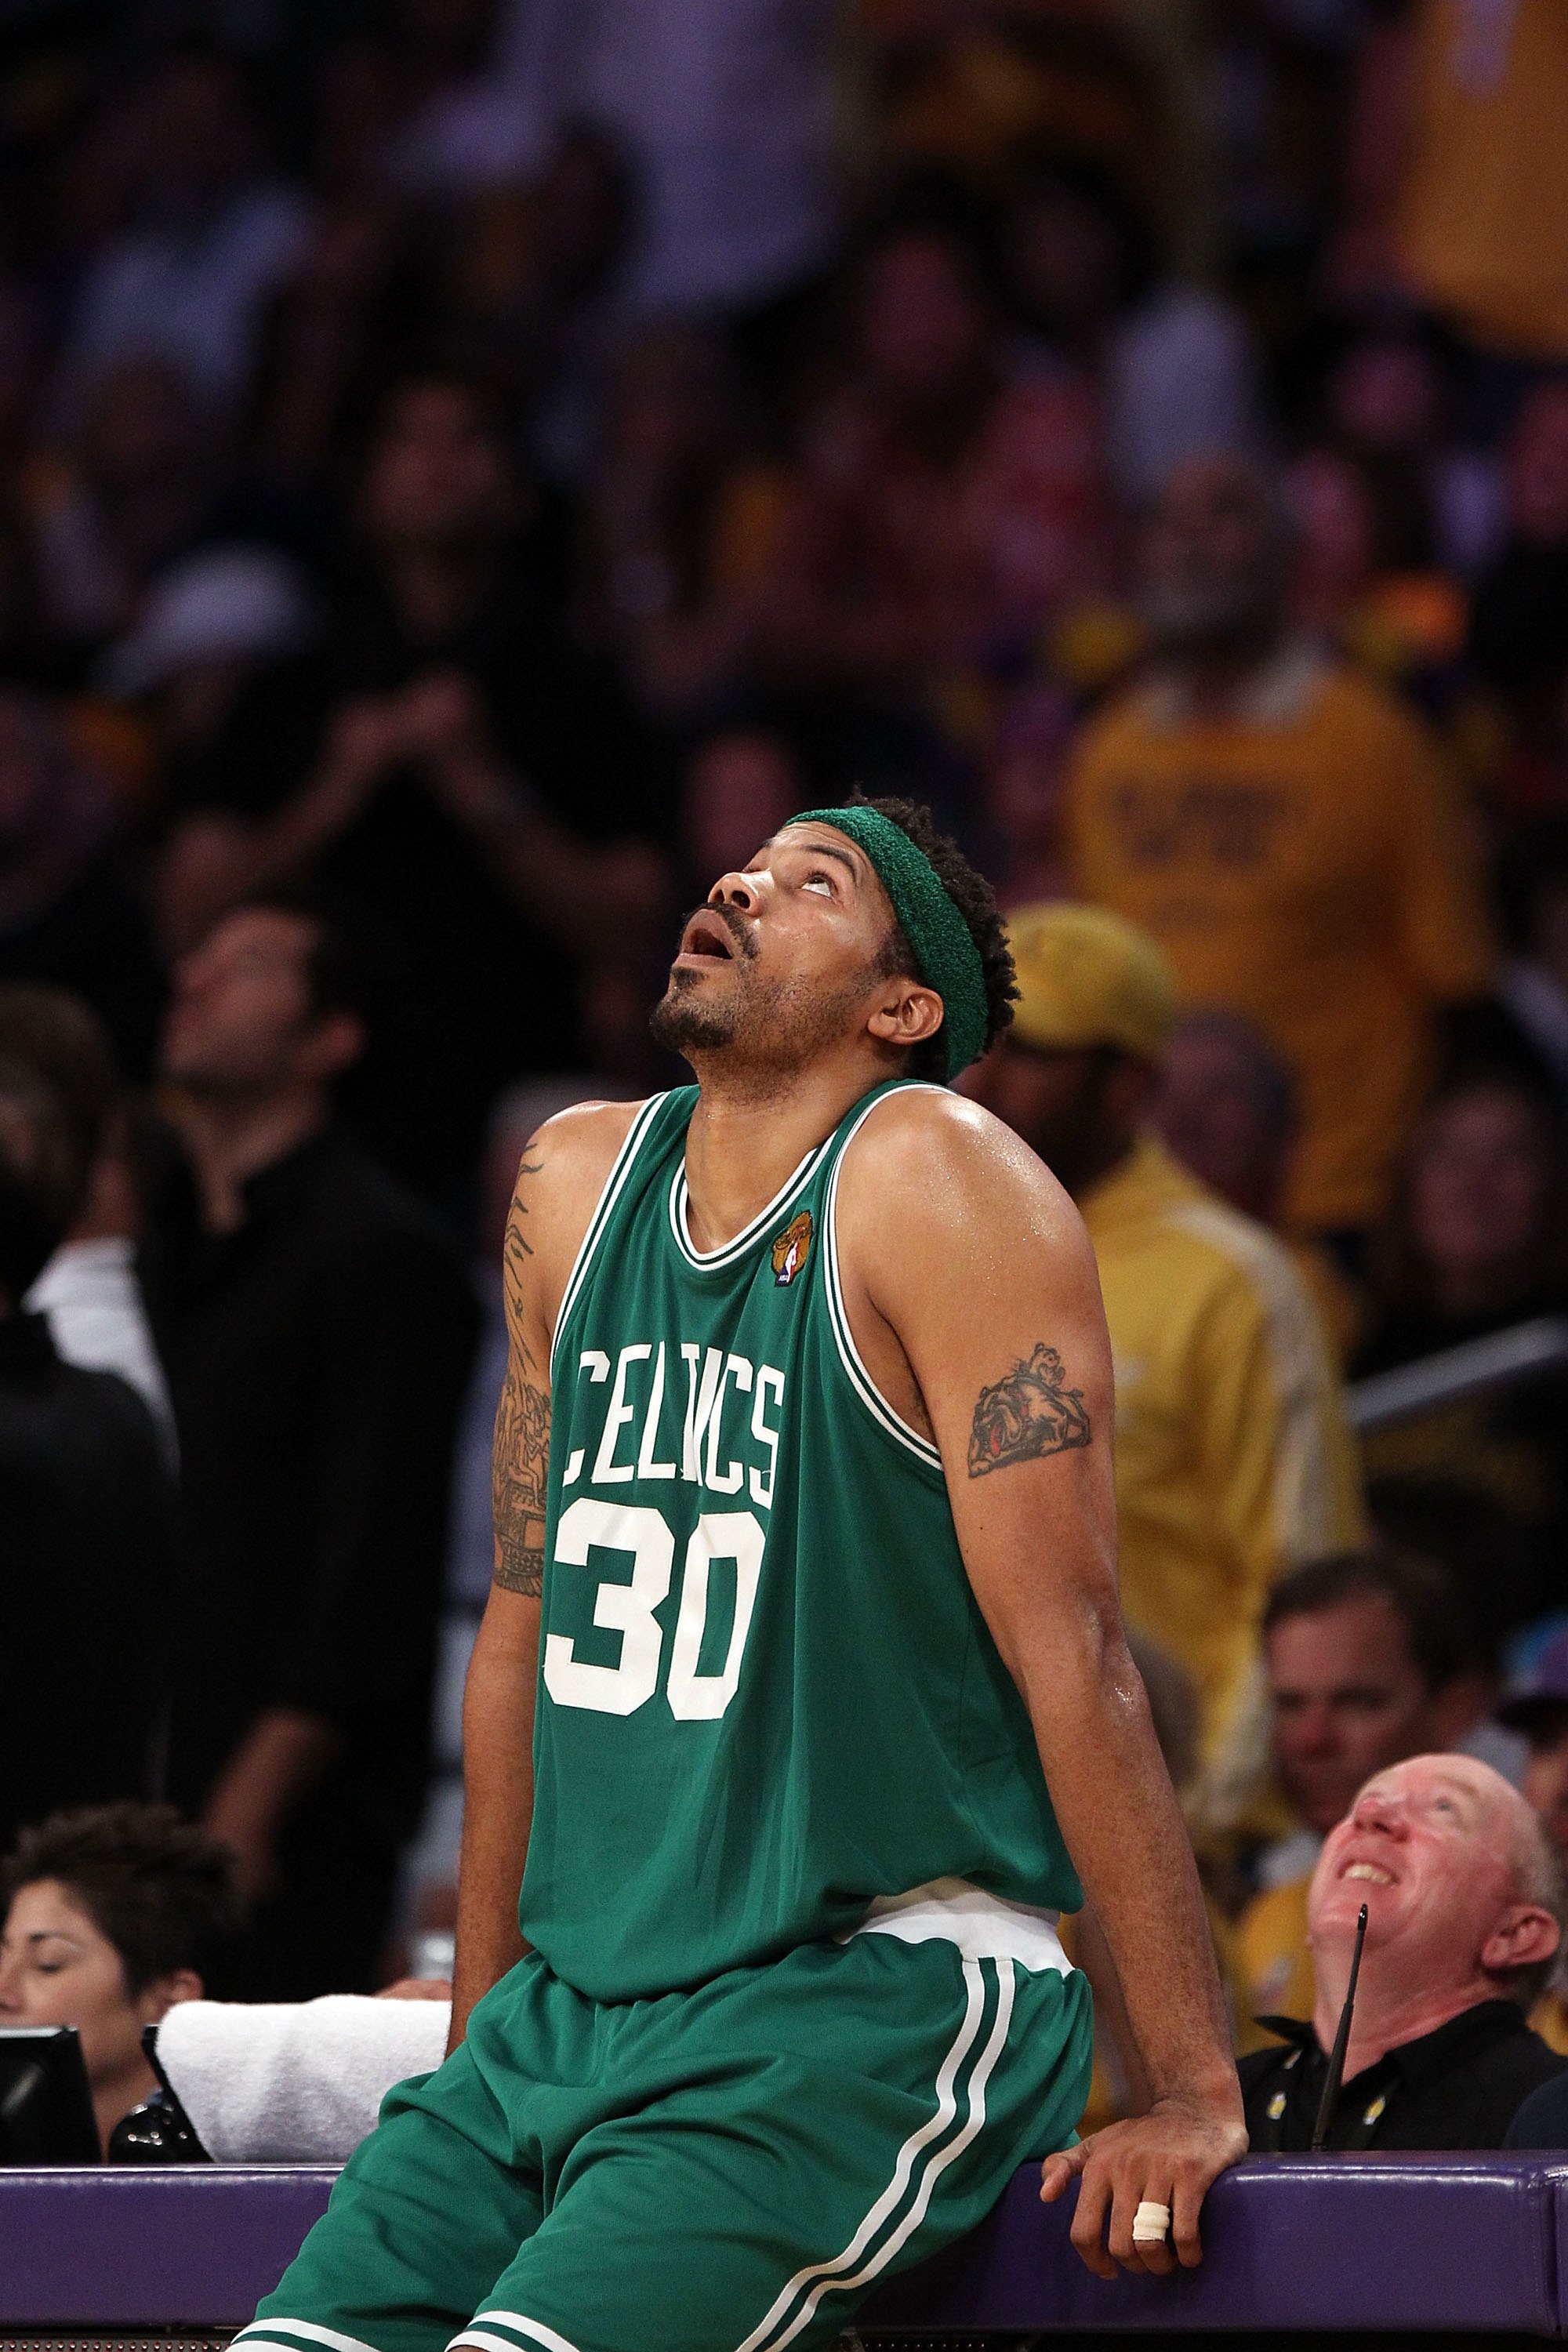 LOS ANGELES, CA - JUNE 17:  Rasheed Wallace #30 of the Boston Celtics reacts against the Los Angeles Lakers in Game Seven of the 2010 NBA Finals at Staples Center on June 17, 2010 in Los Angeles, California.  NOTE TO USER: User expressly acknowledges and